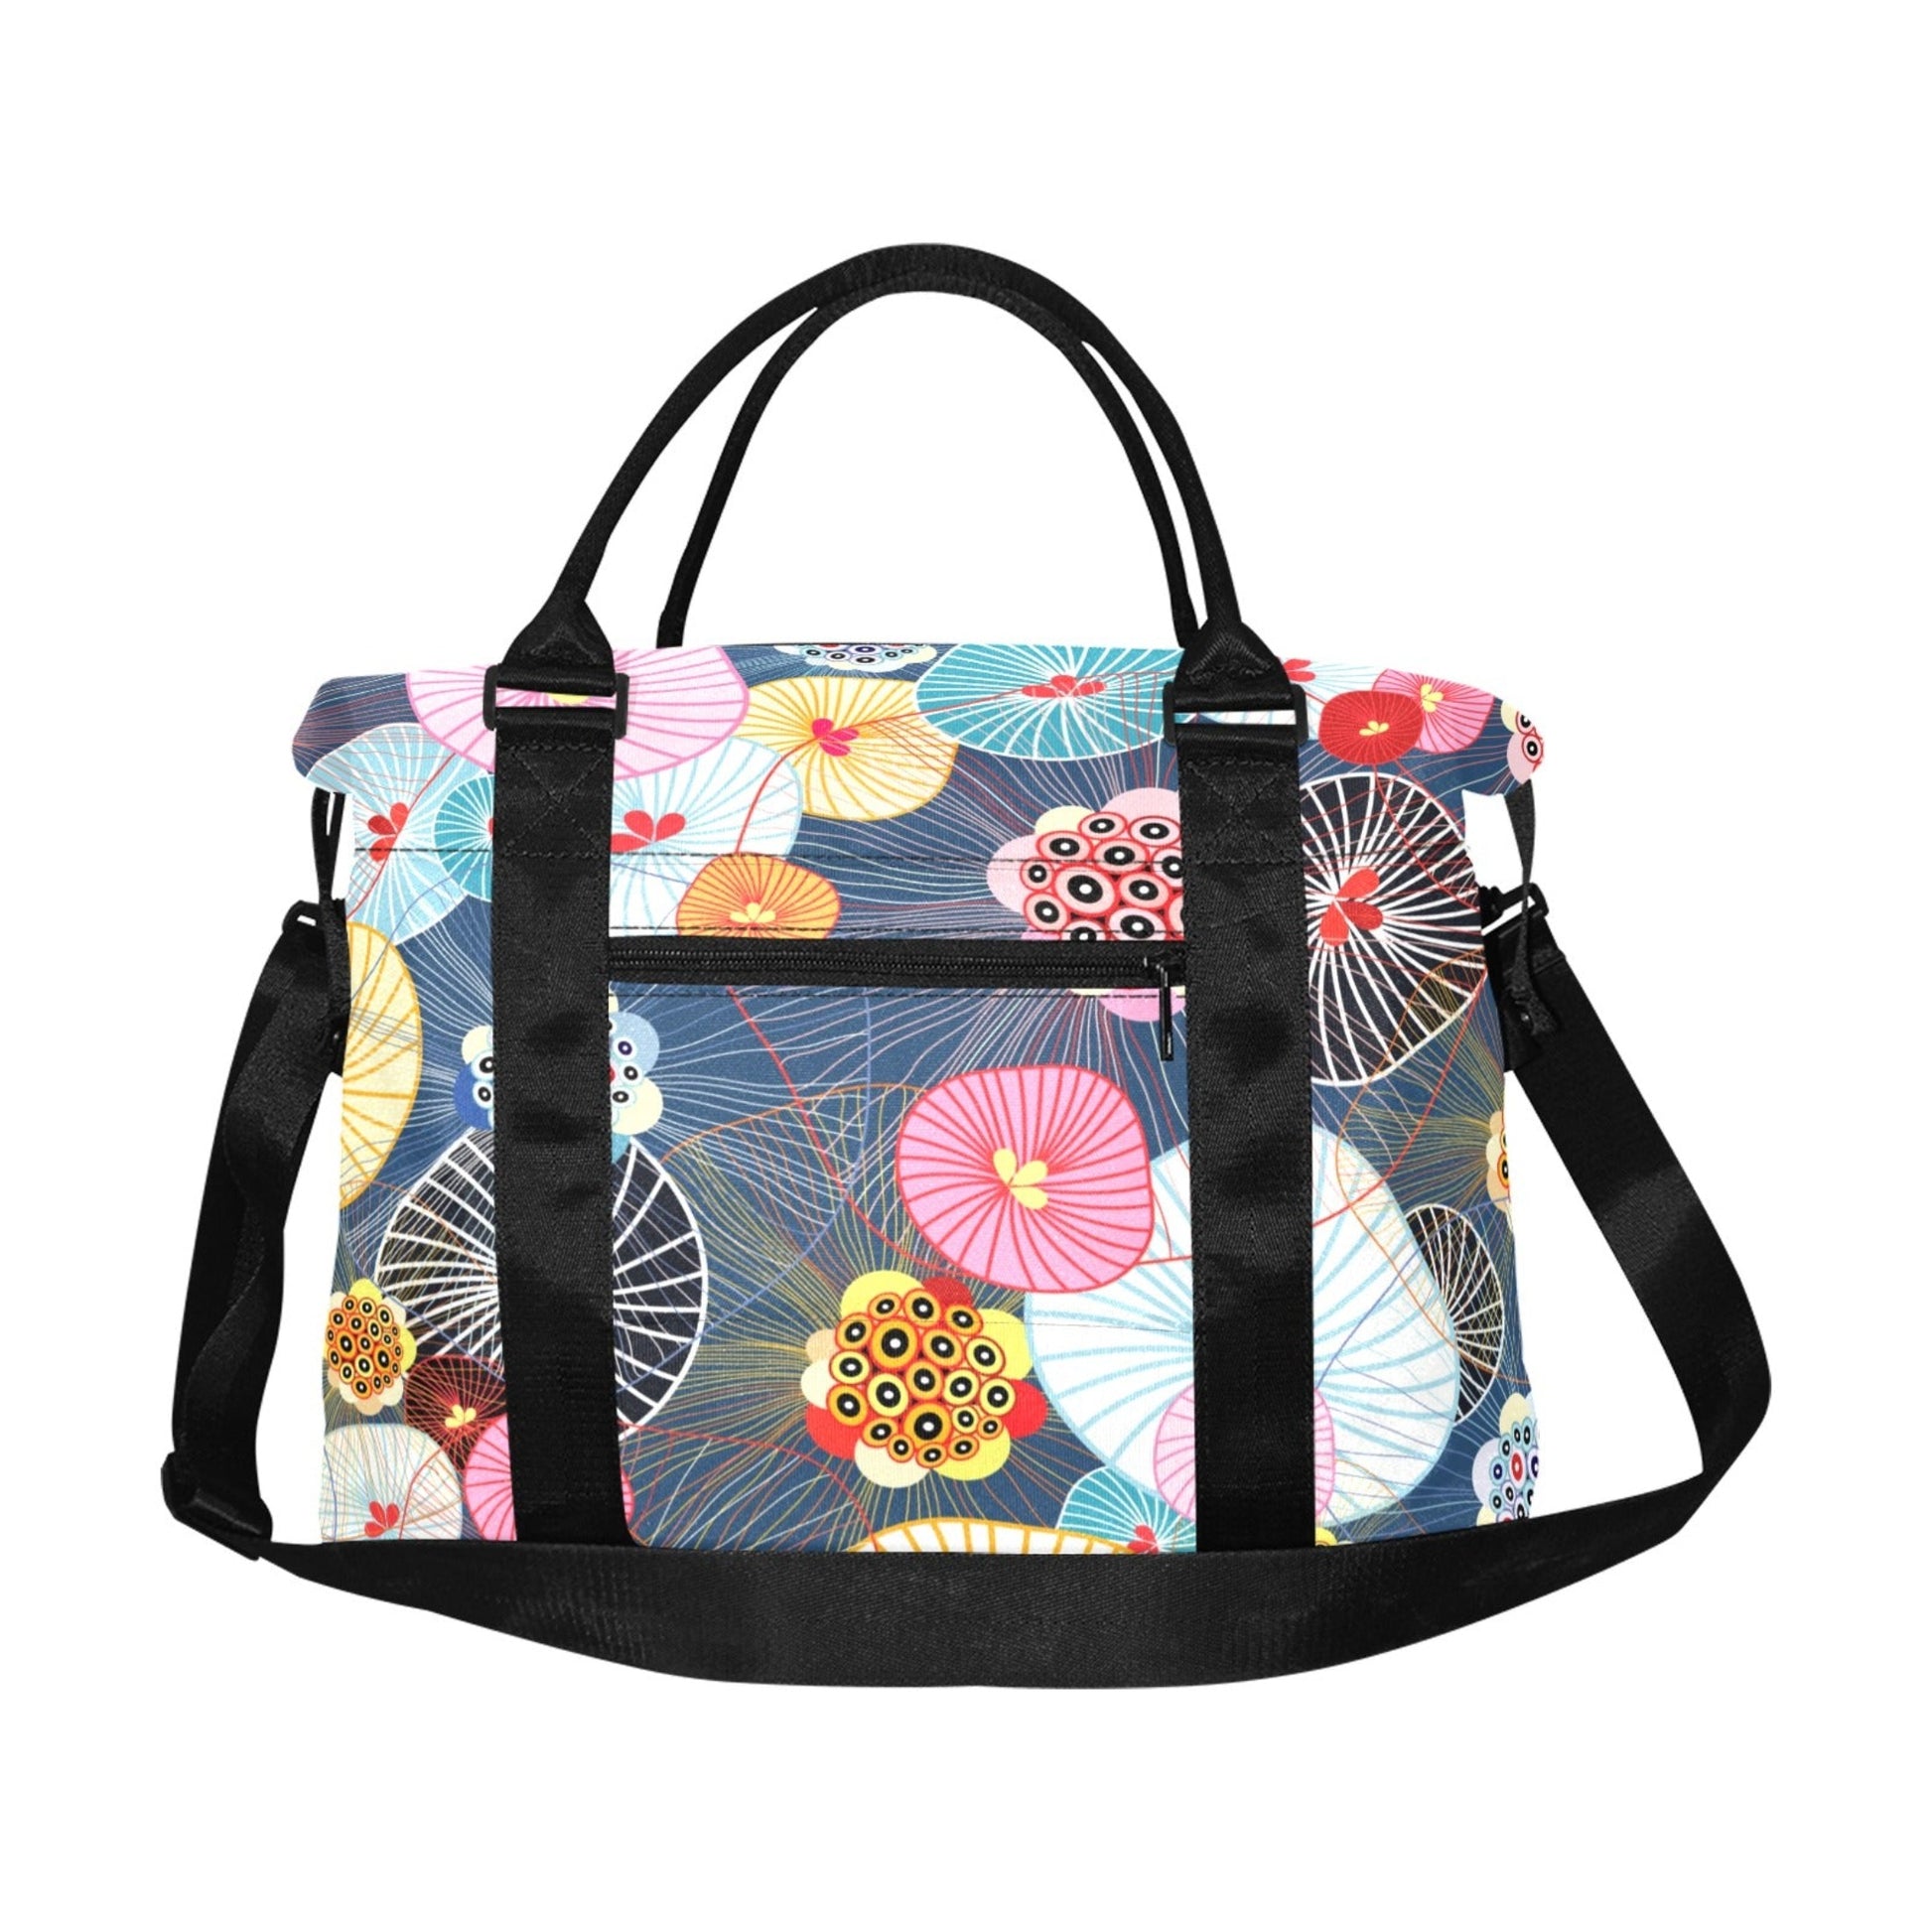 Abstract Floral - Square Duffle Bag Square Duffle Bag